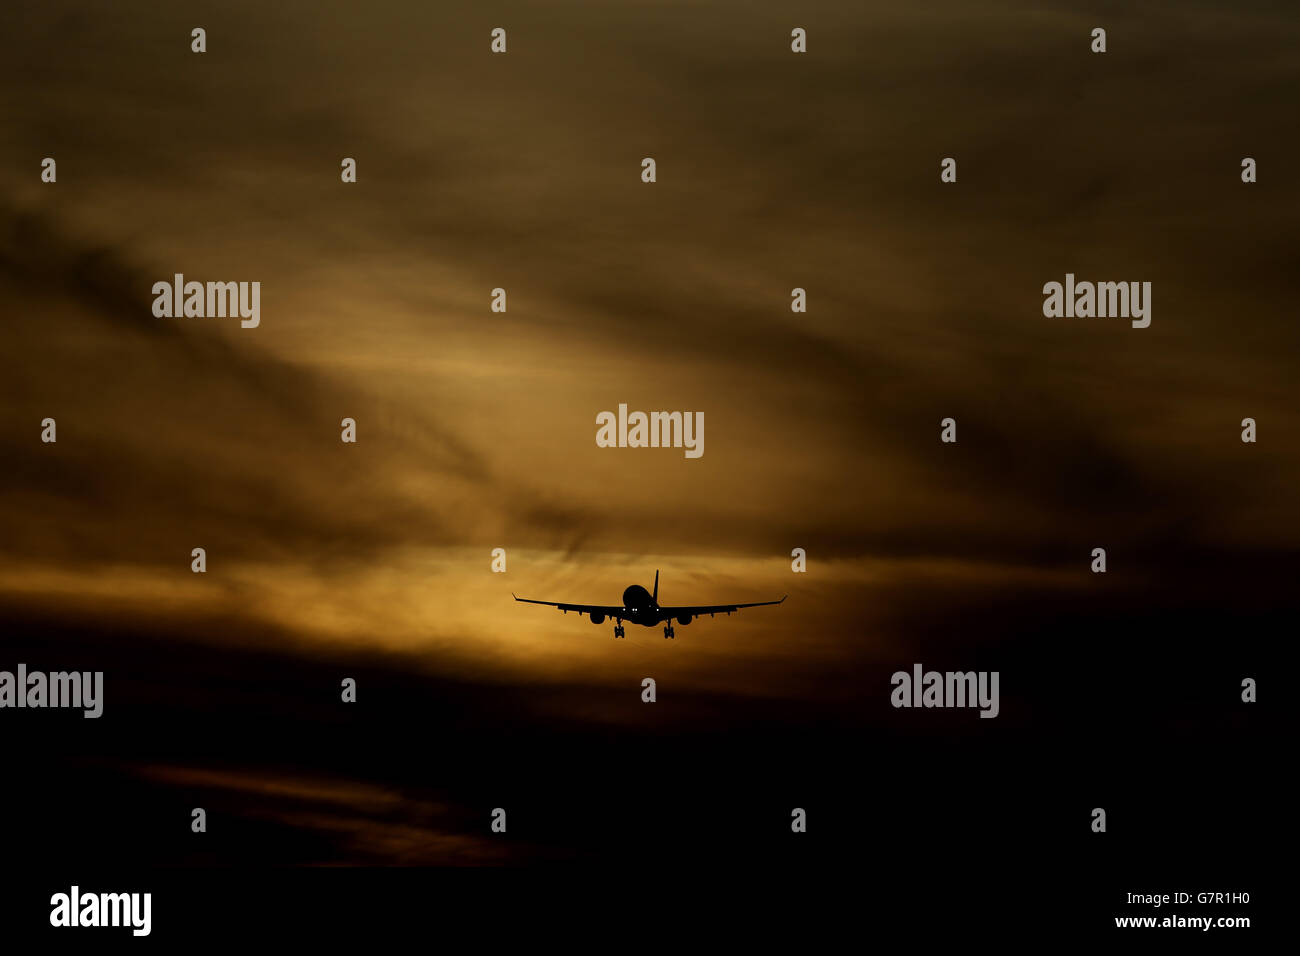 A plane coming in to land at dusk at Heathrow Airport. Stock Photo